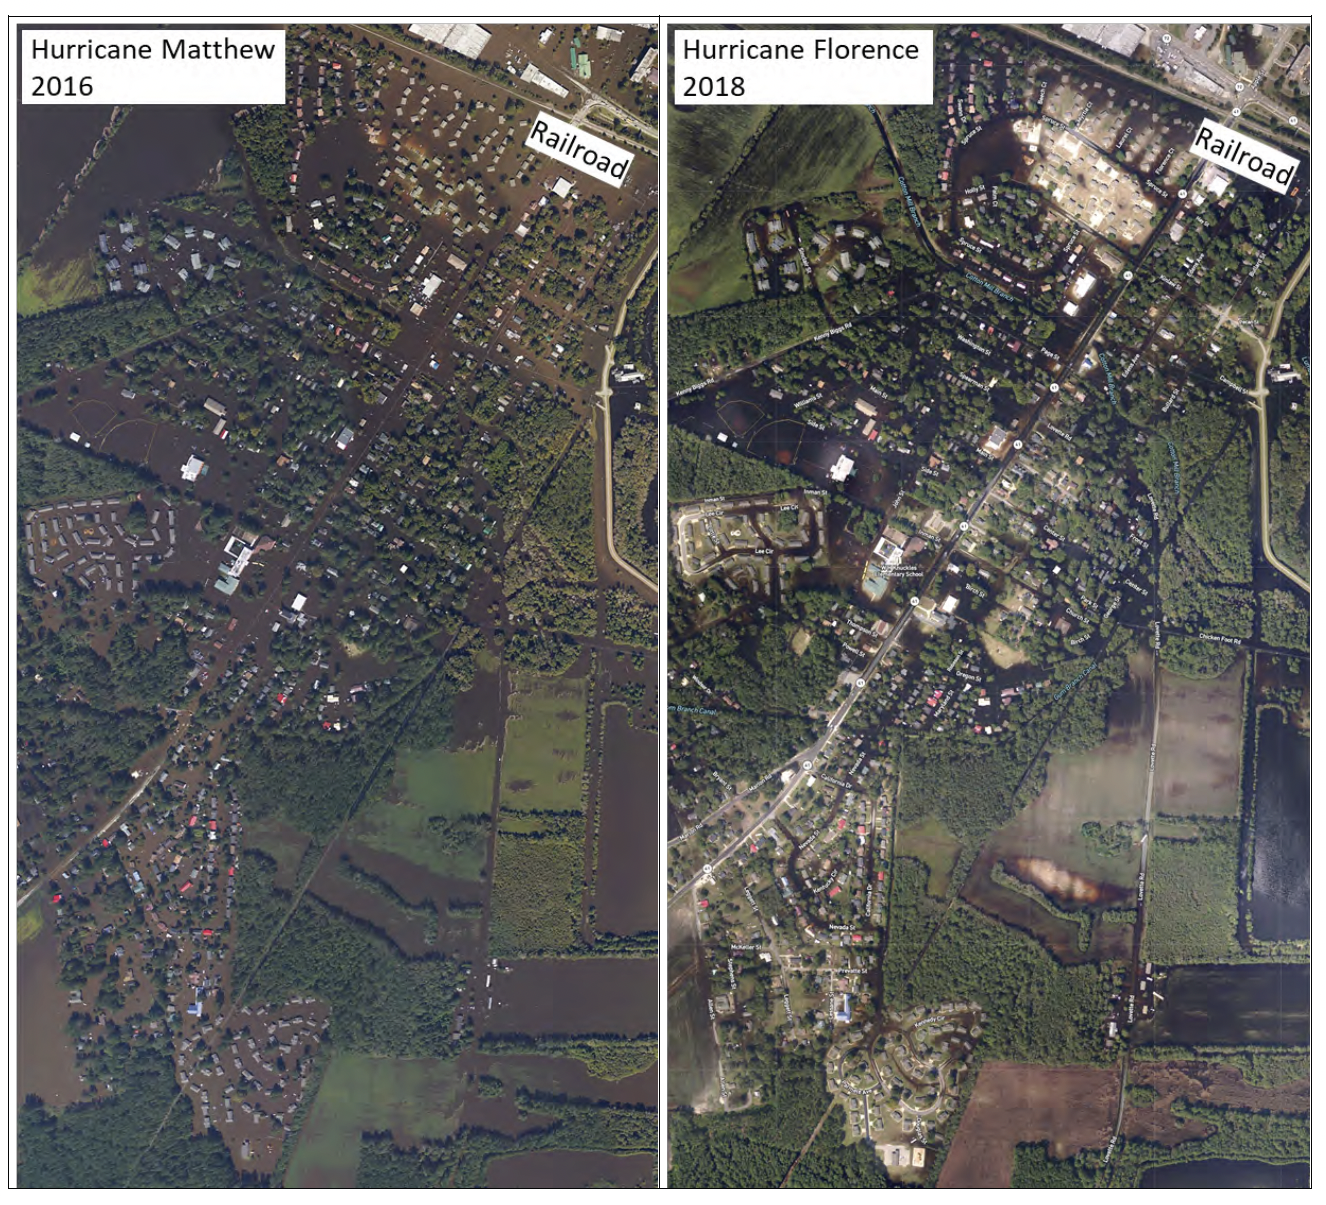 Side-by-side aerial images show flooding in a residential area in 2016 and 2018.